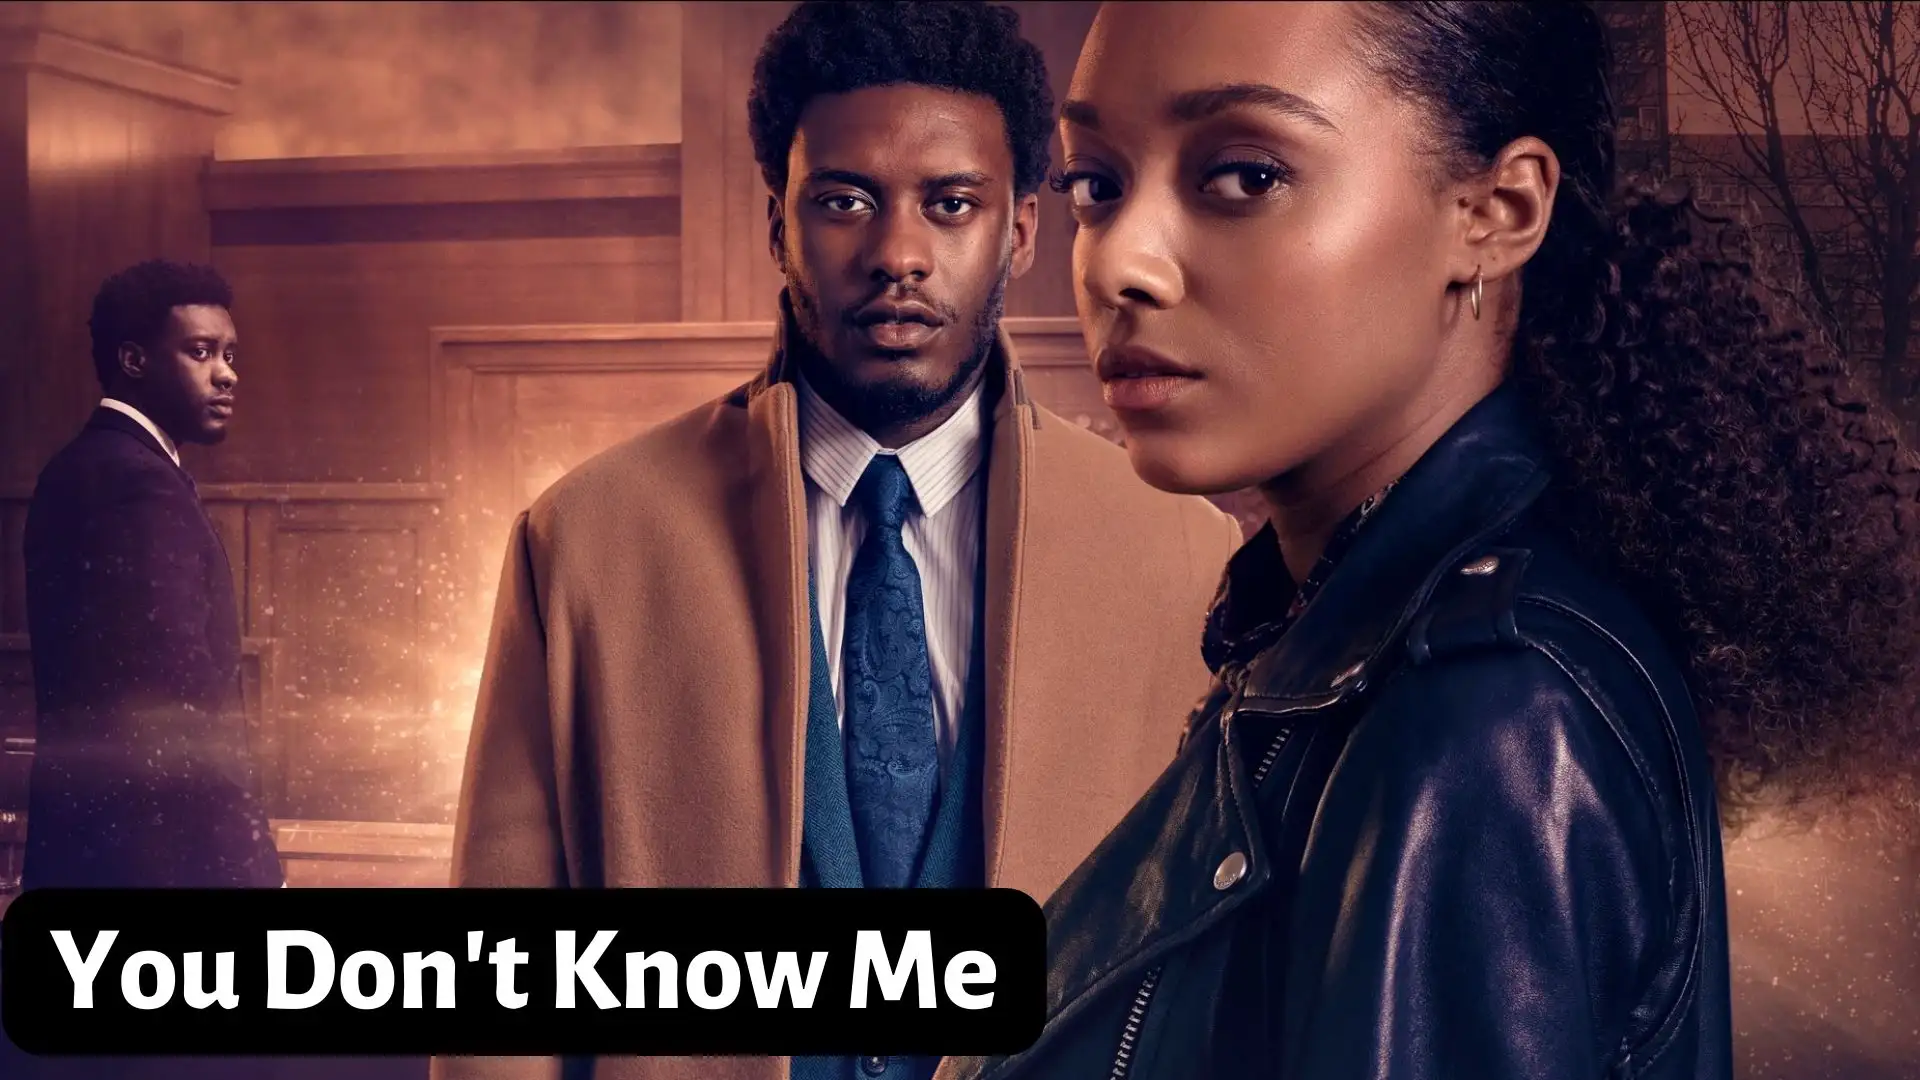 You Don't Know Me Parents Guide and Age Rating | 2022